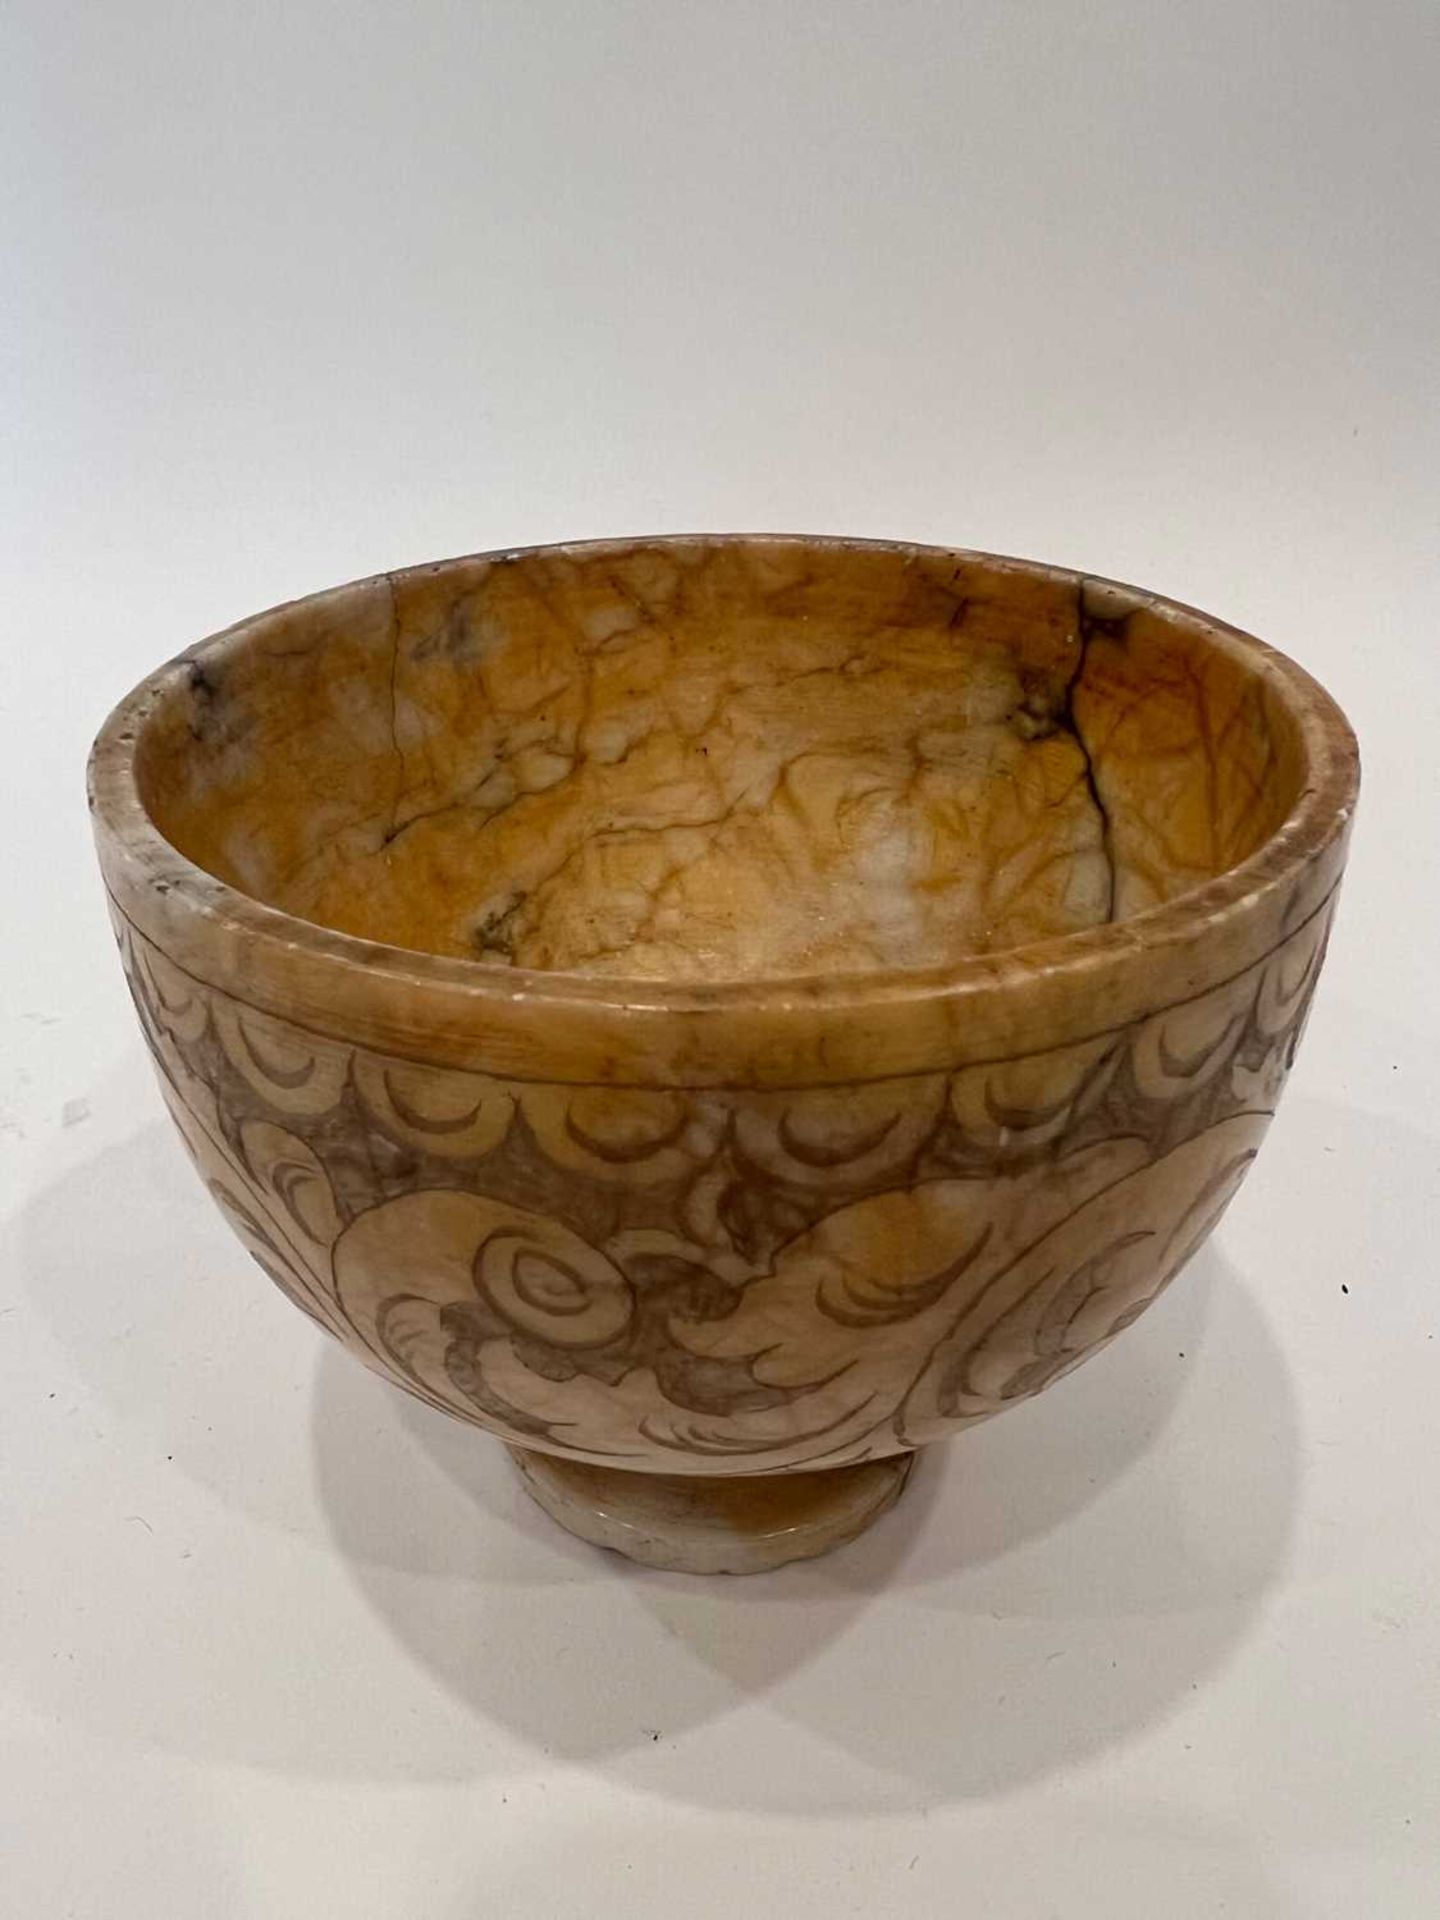 AN 18TH / 19TH CENTURY ITALIAN CARVED ALABASTER BOWL - Image 5 of 6